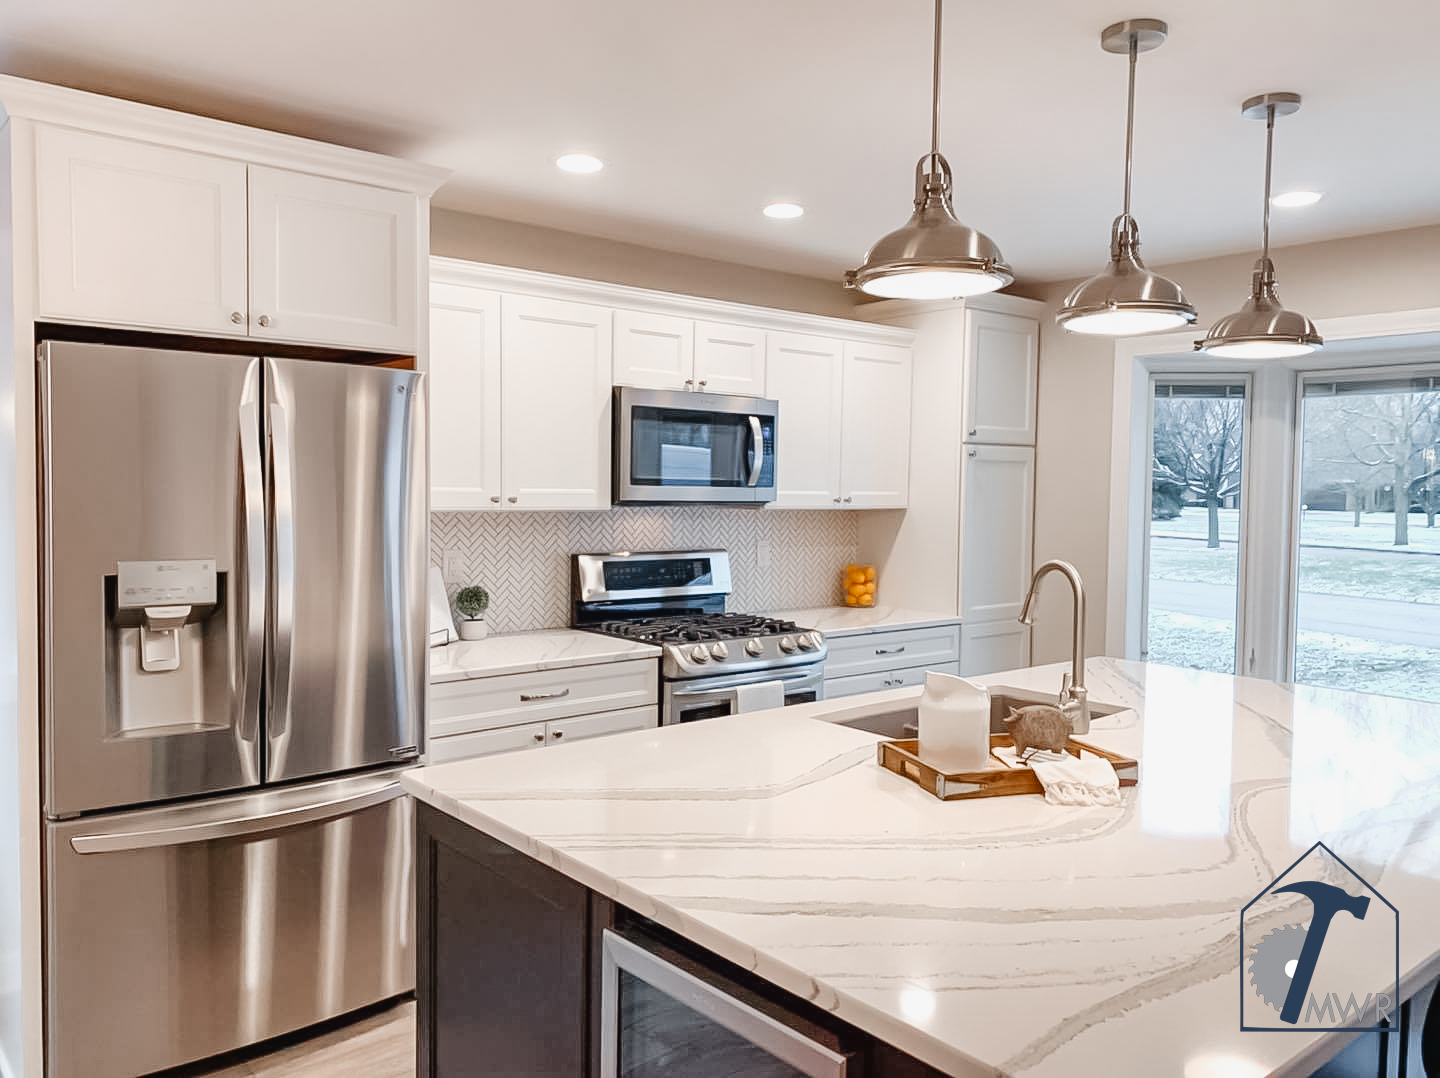 At Midwest Remodel, we bring your dream kitchen to life.